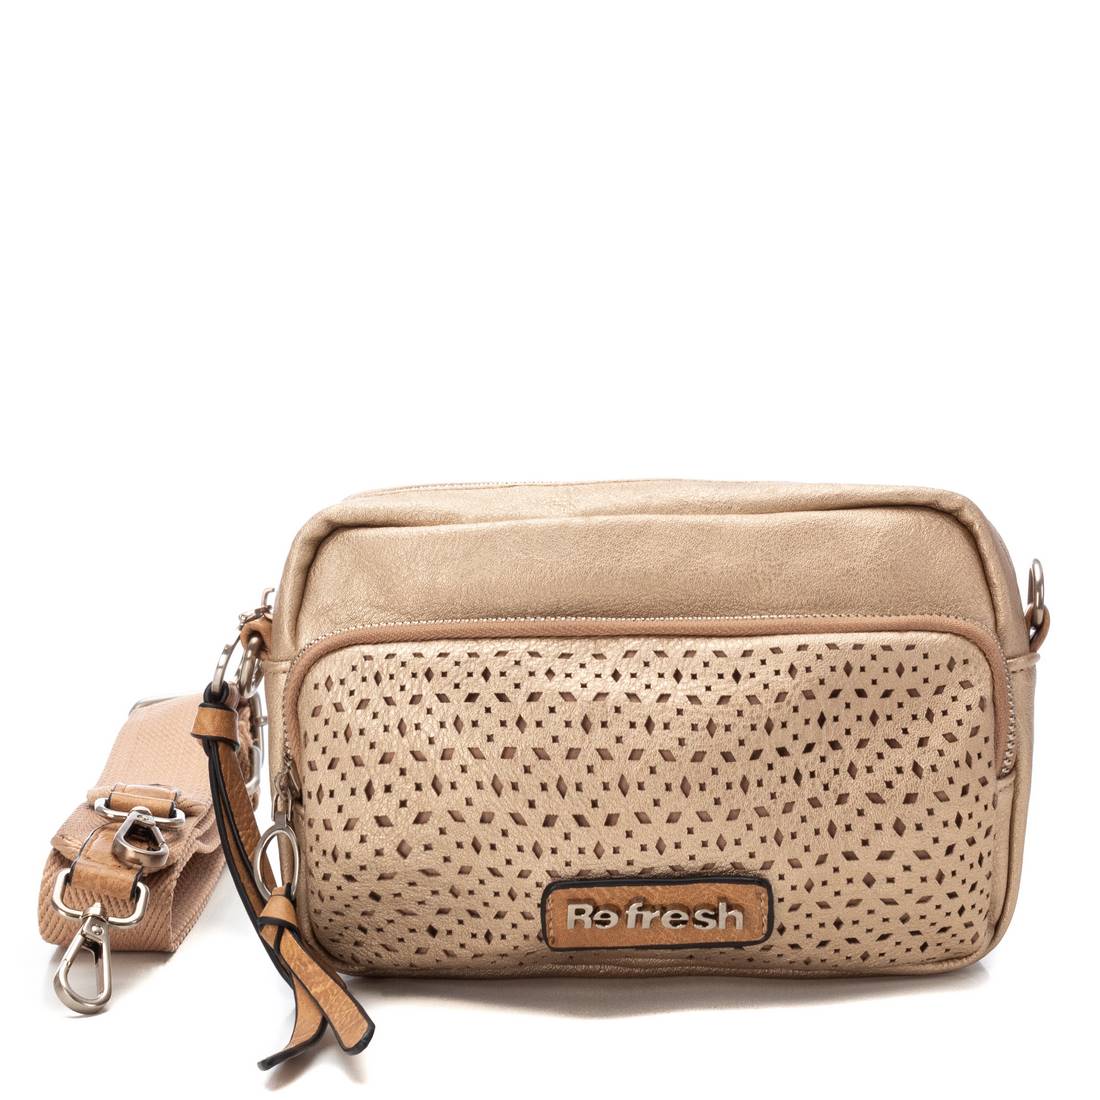 Refresh - Crossover Bag in Gold 183163